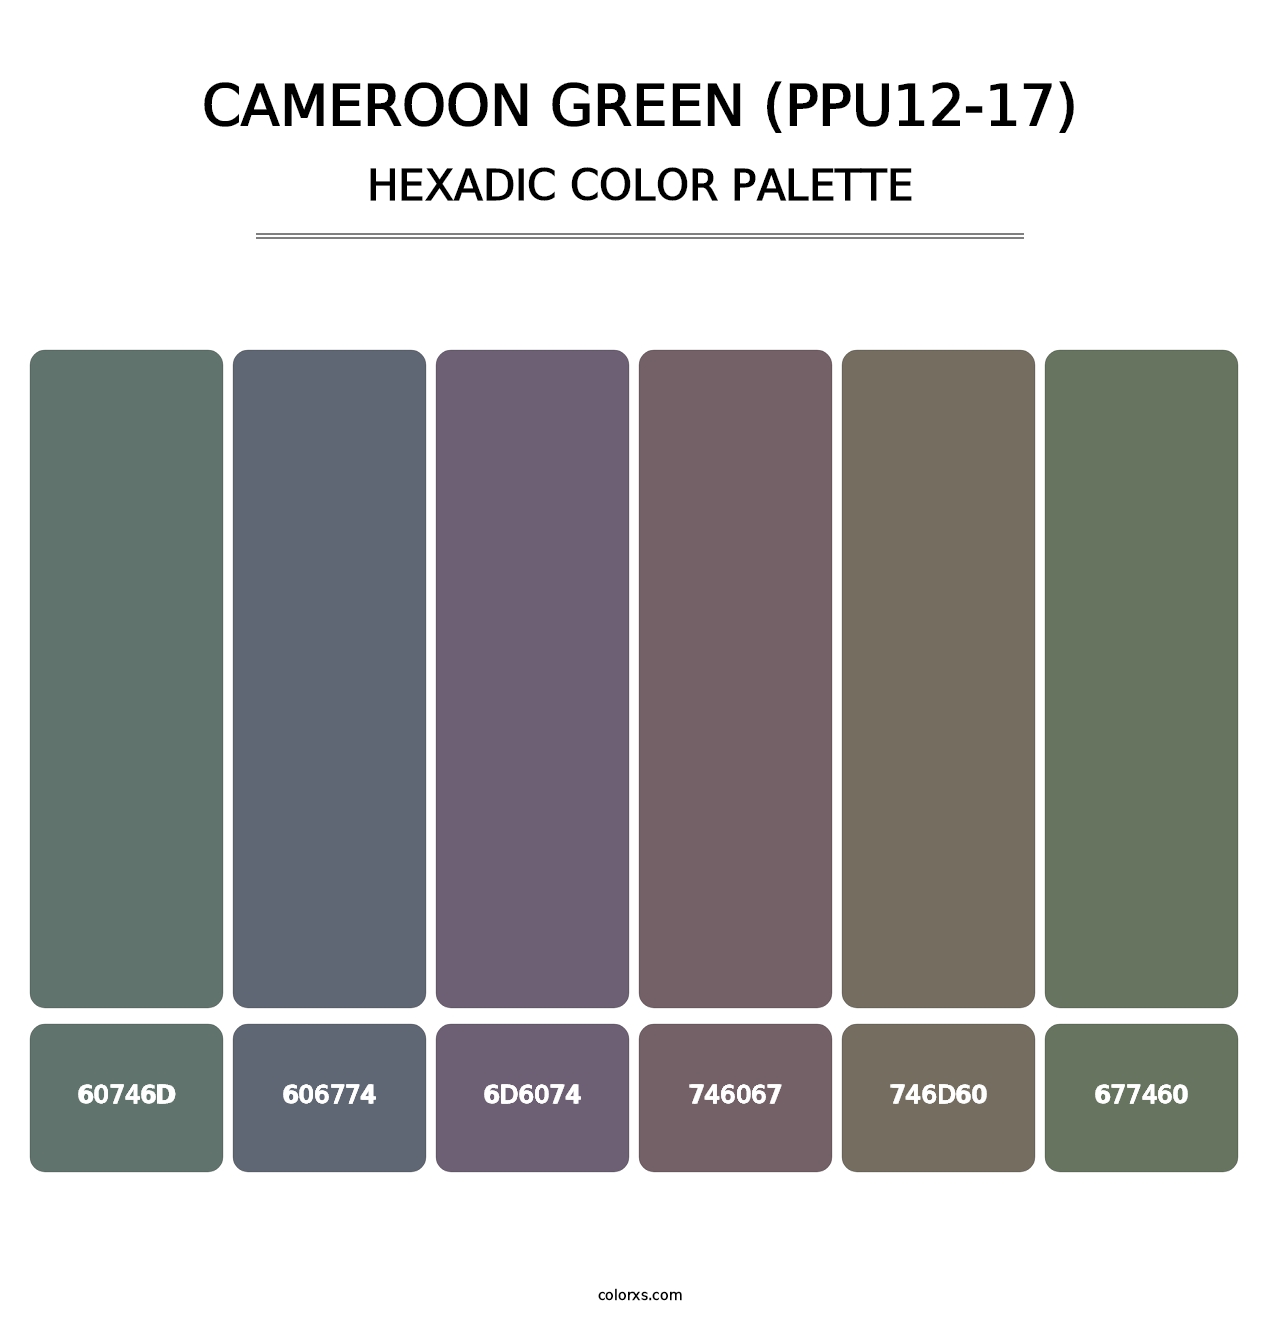 Cameroon Green (PPU12-17) - Hexadic Color Palette